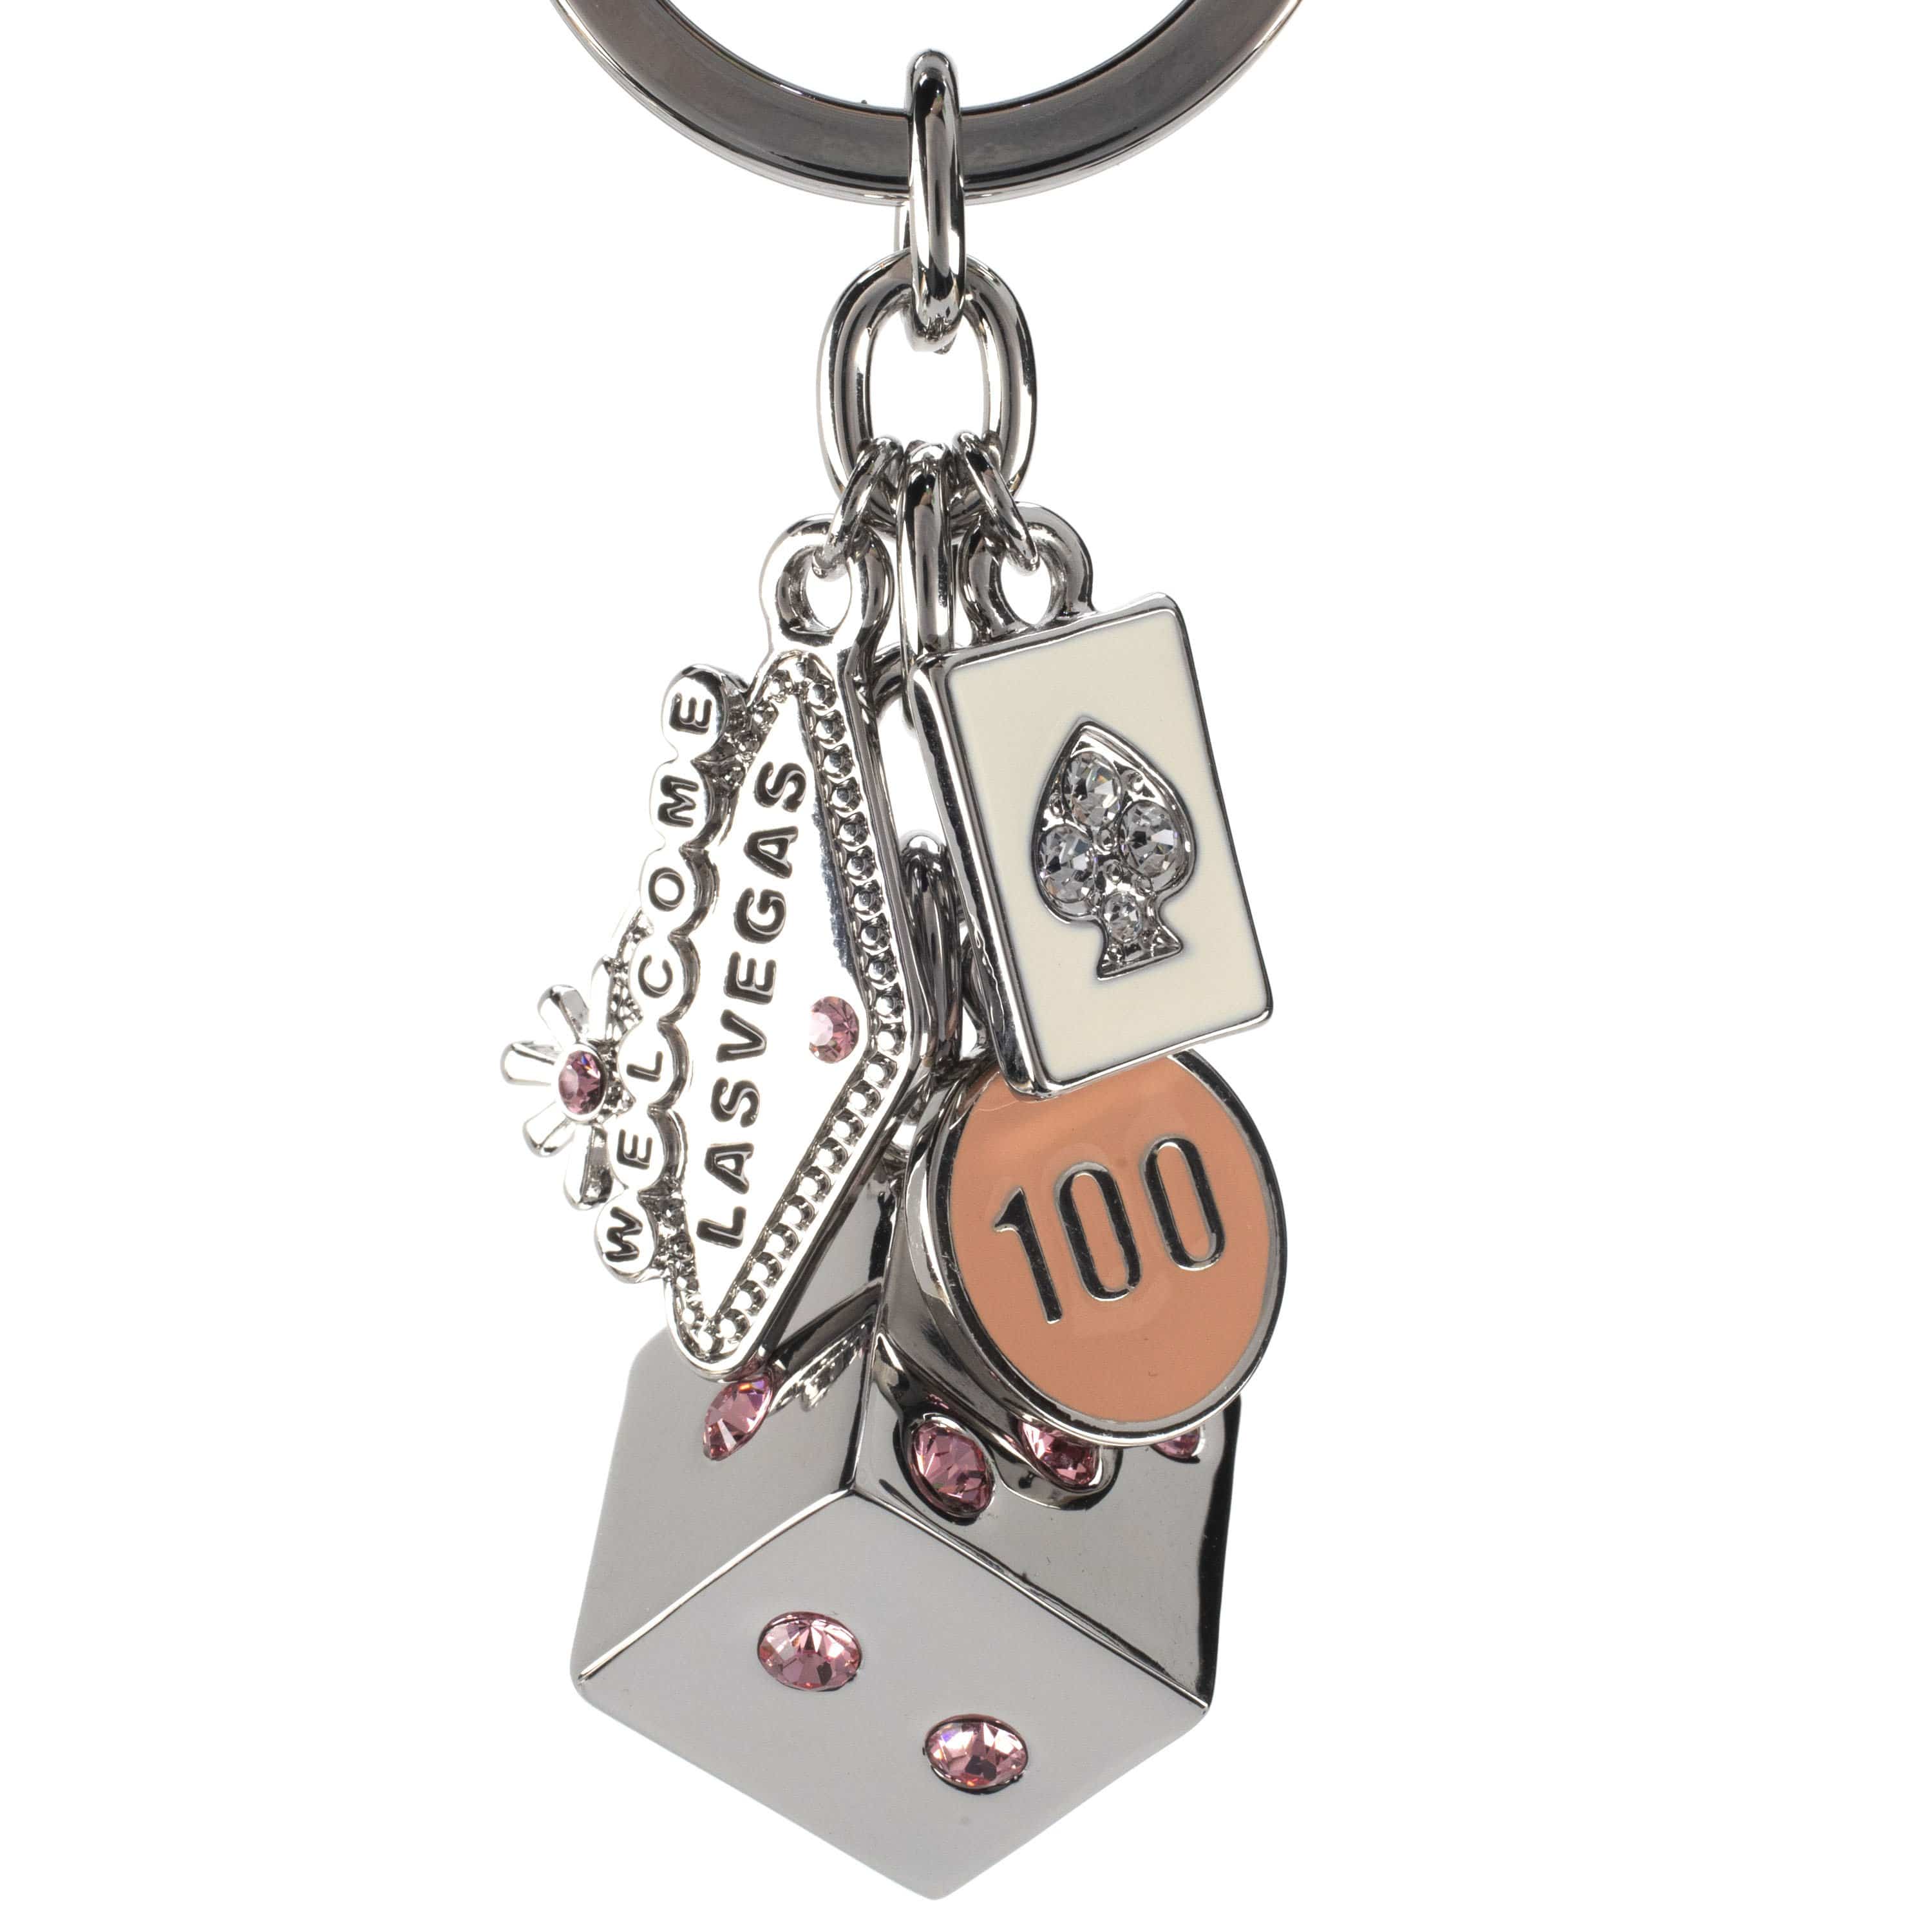 Chrome Plated Letter N Keychain Ring With Swarovski Crystals